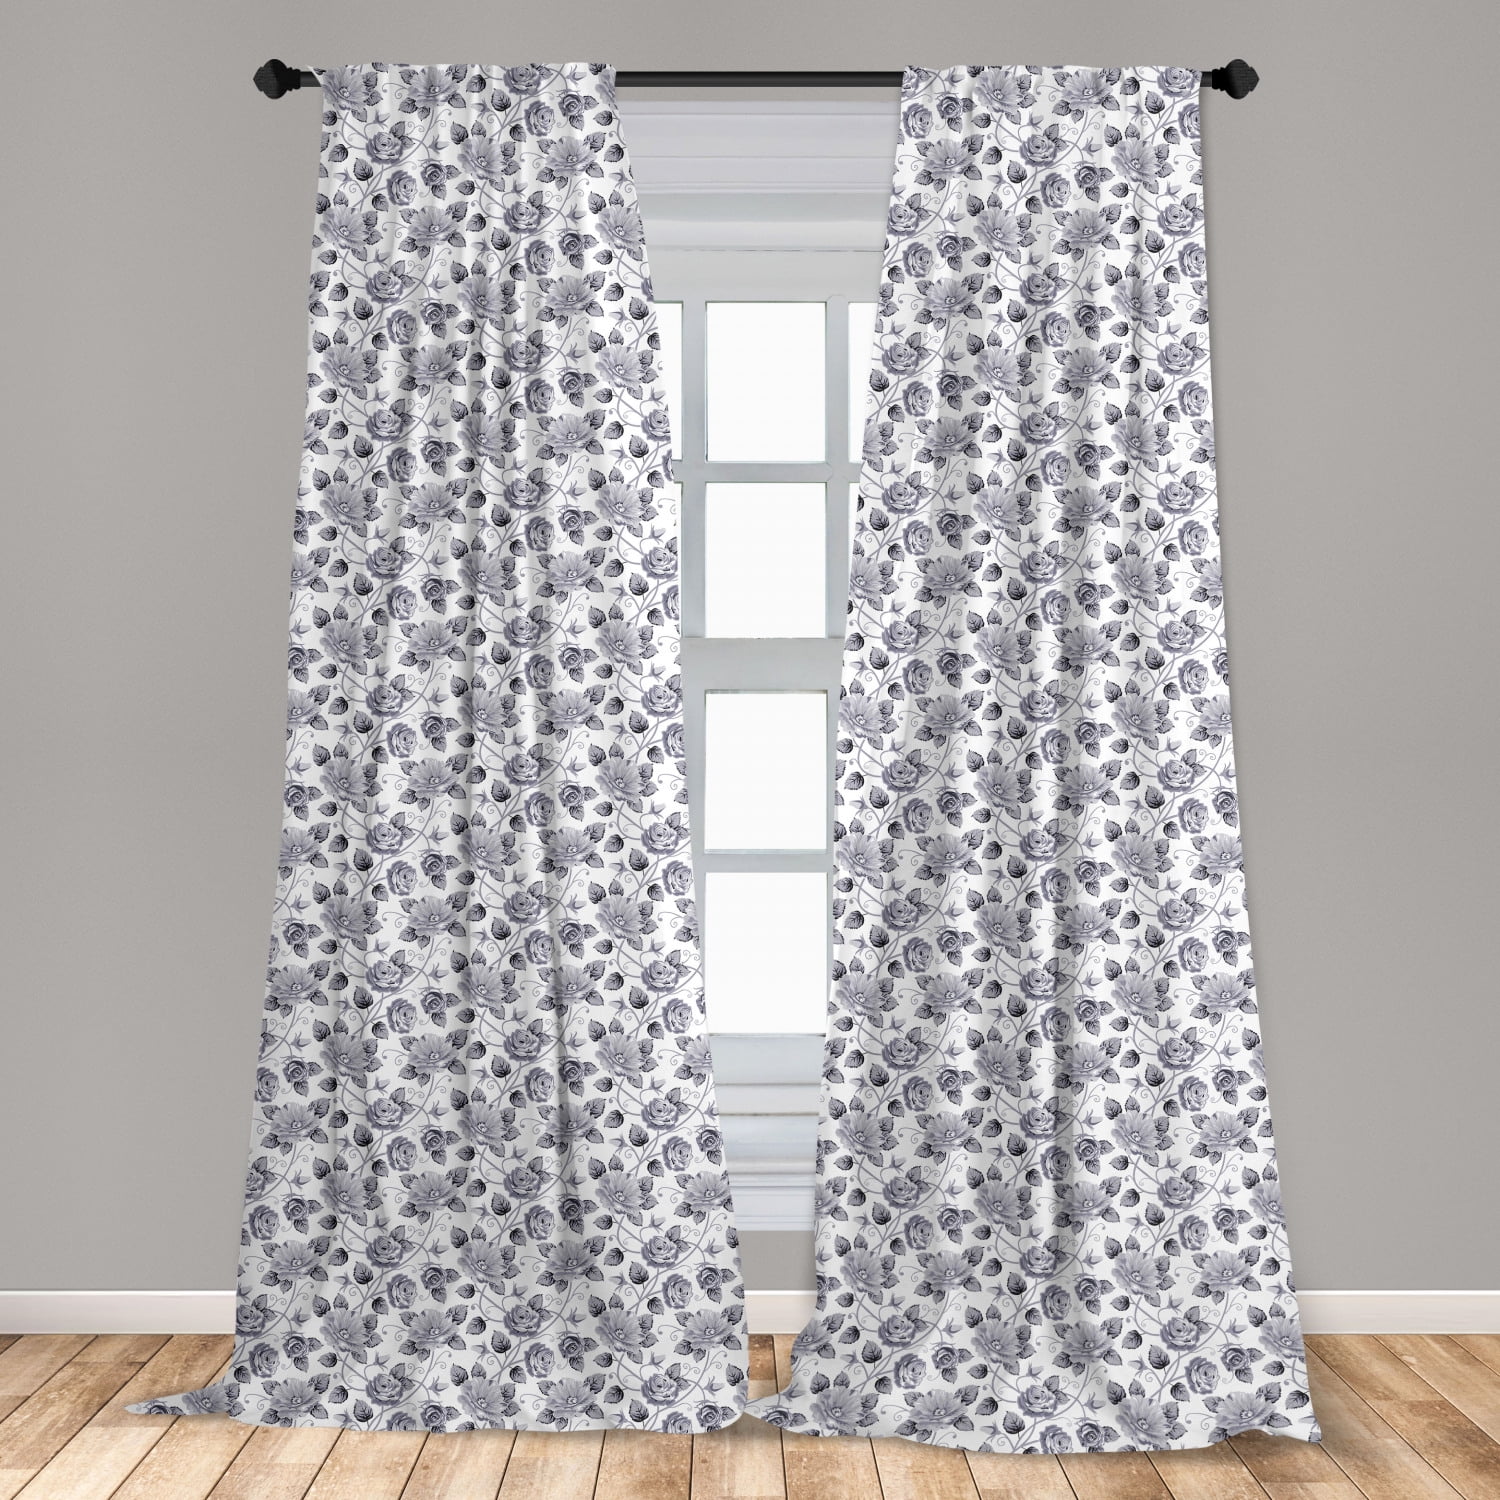 Graphic print curtains